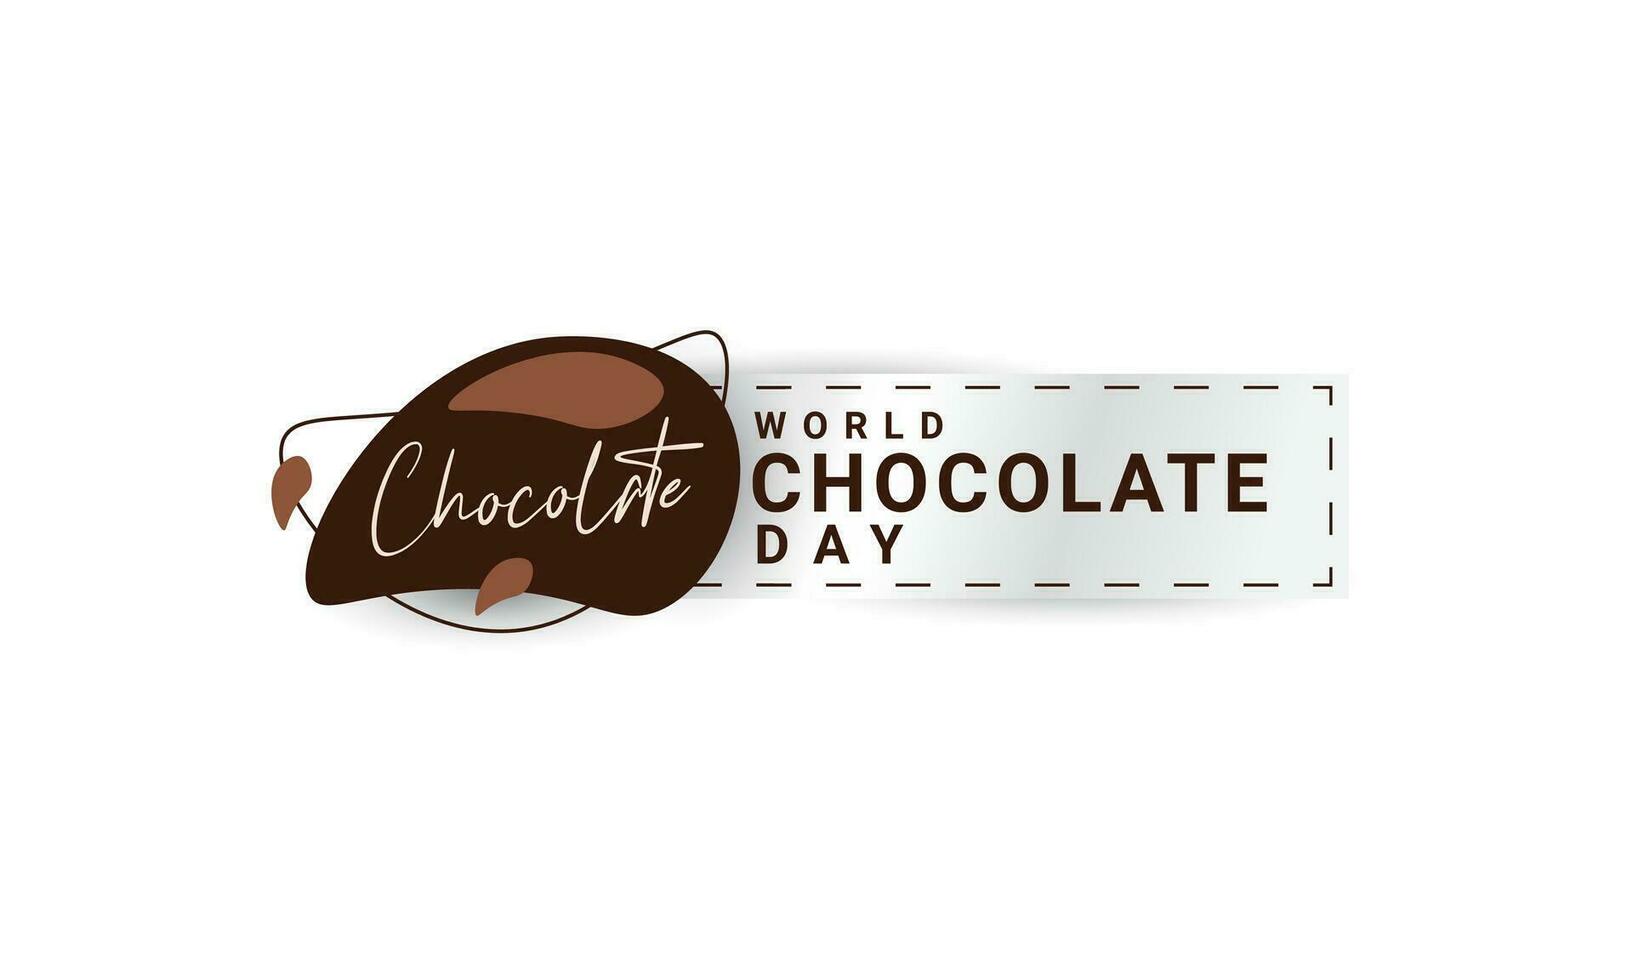 world chocolate day background, suitable for posters, social media posts, and others vector